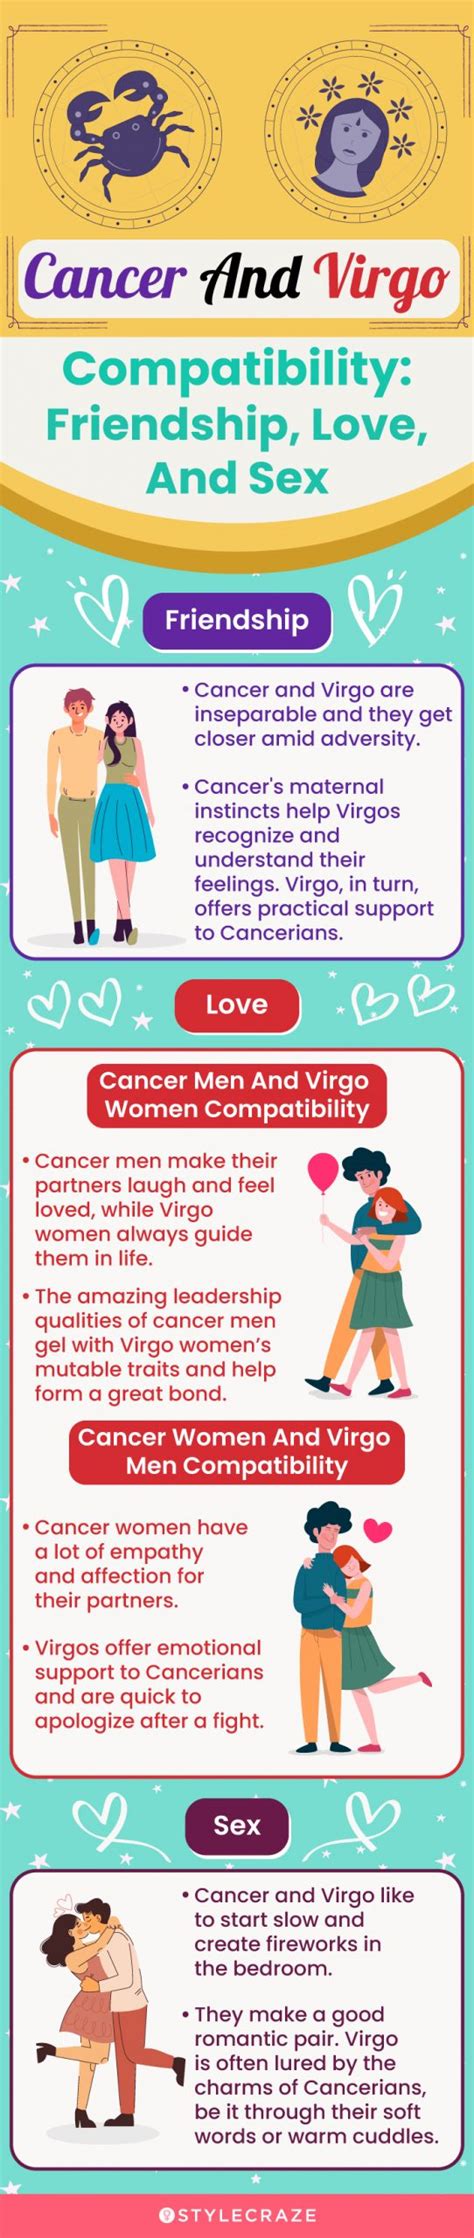 Cancer And Virgo Compatibility In Love Friendship And Intimacy